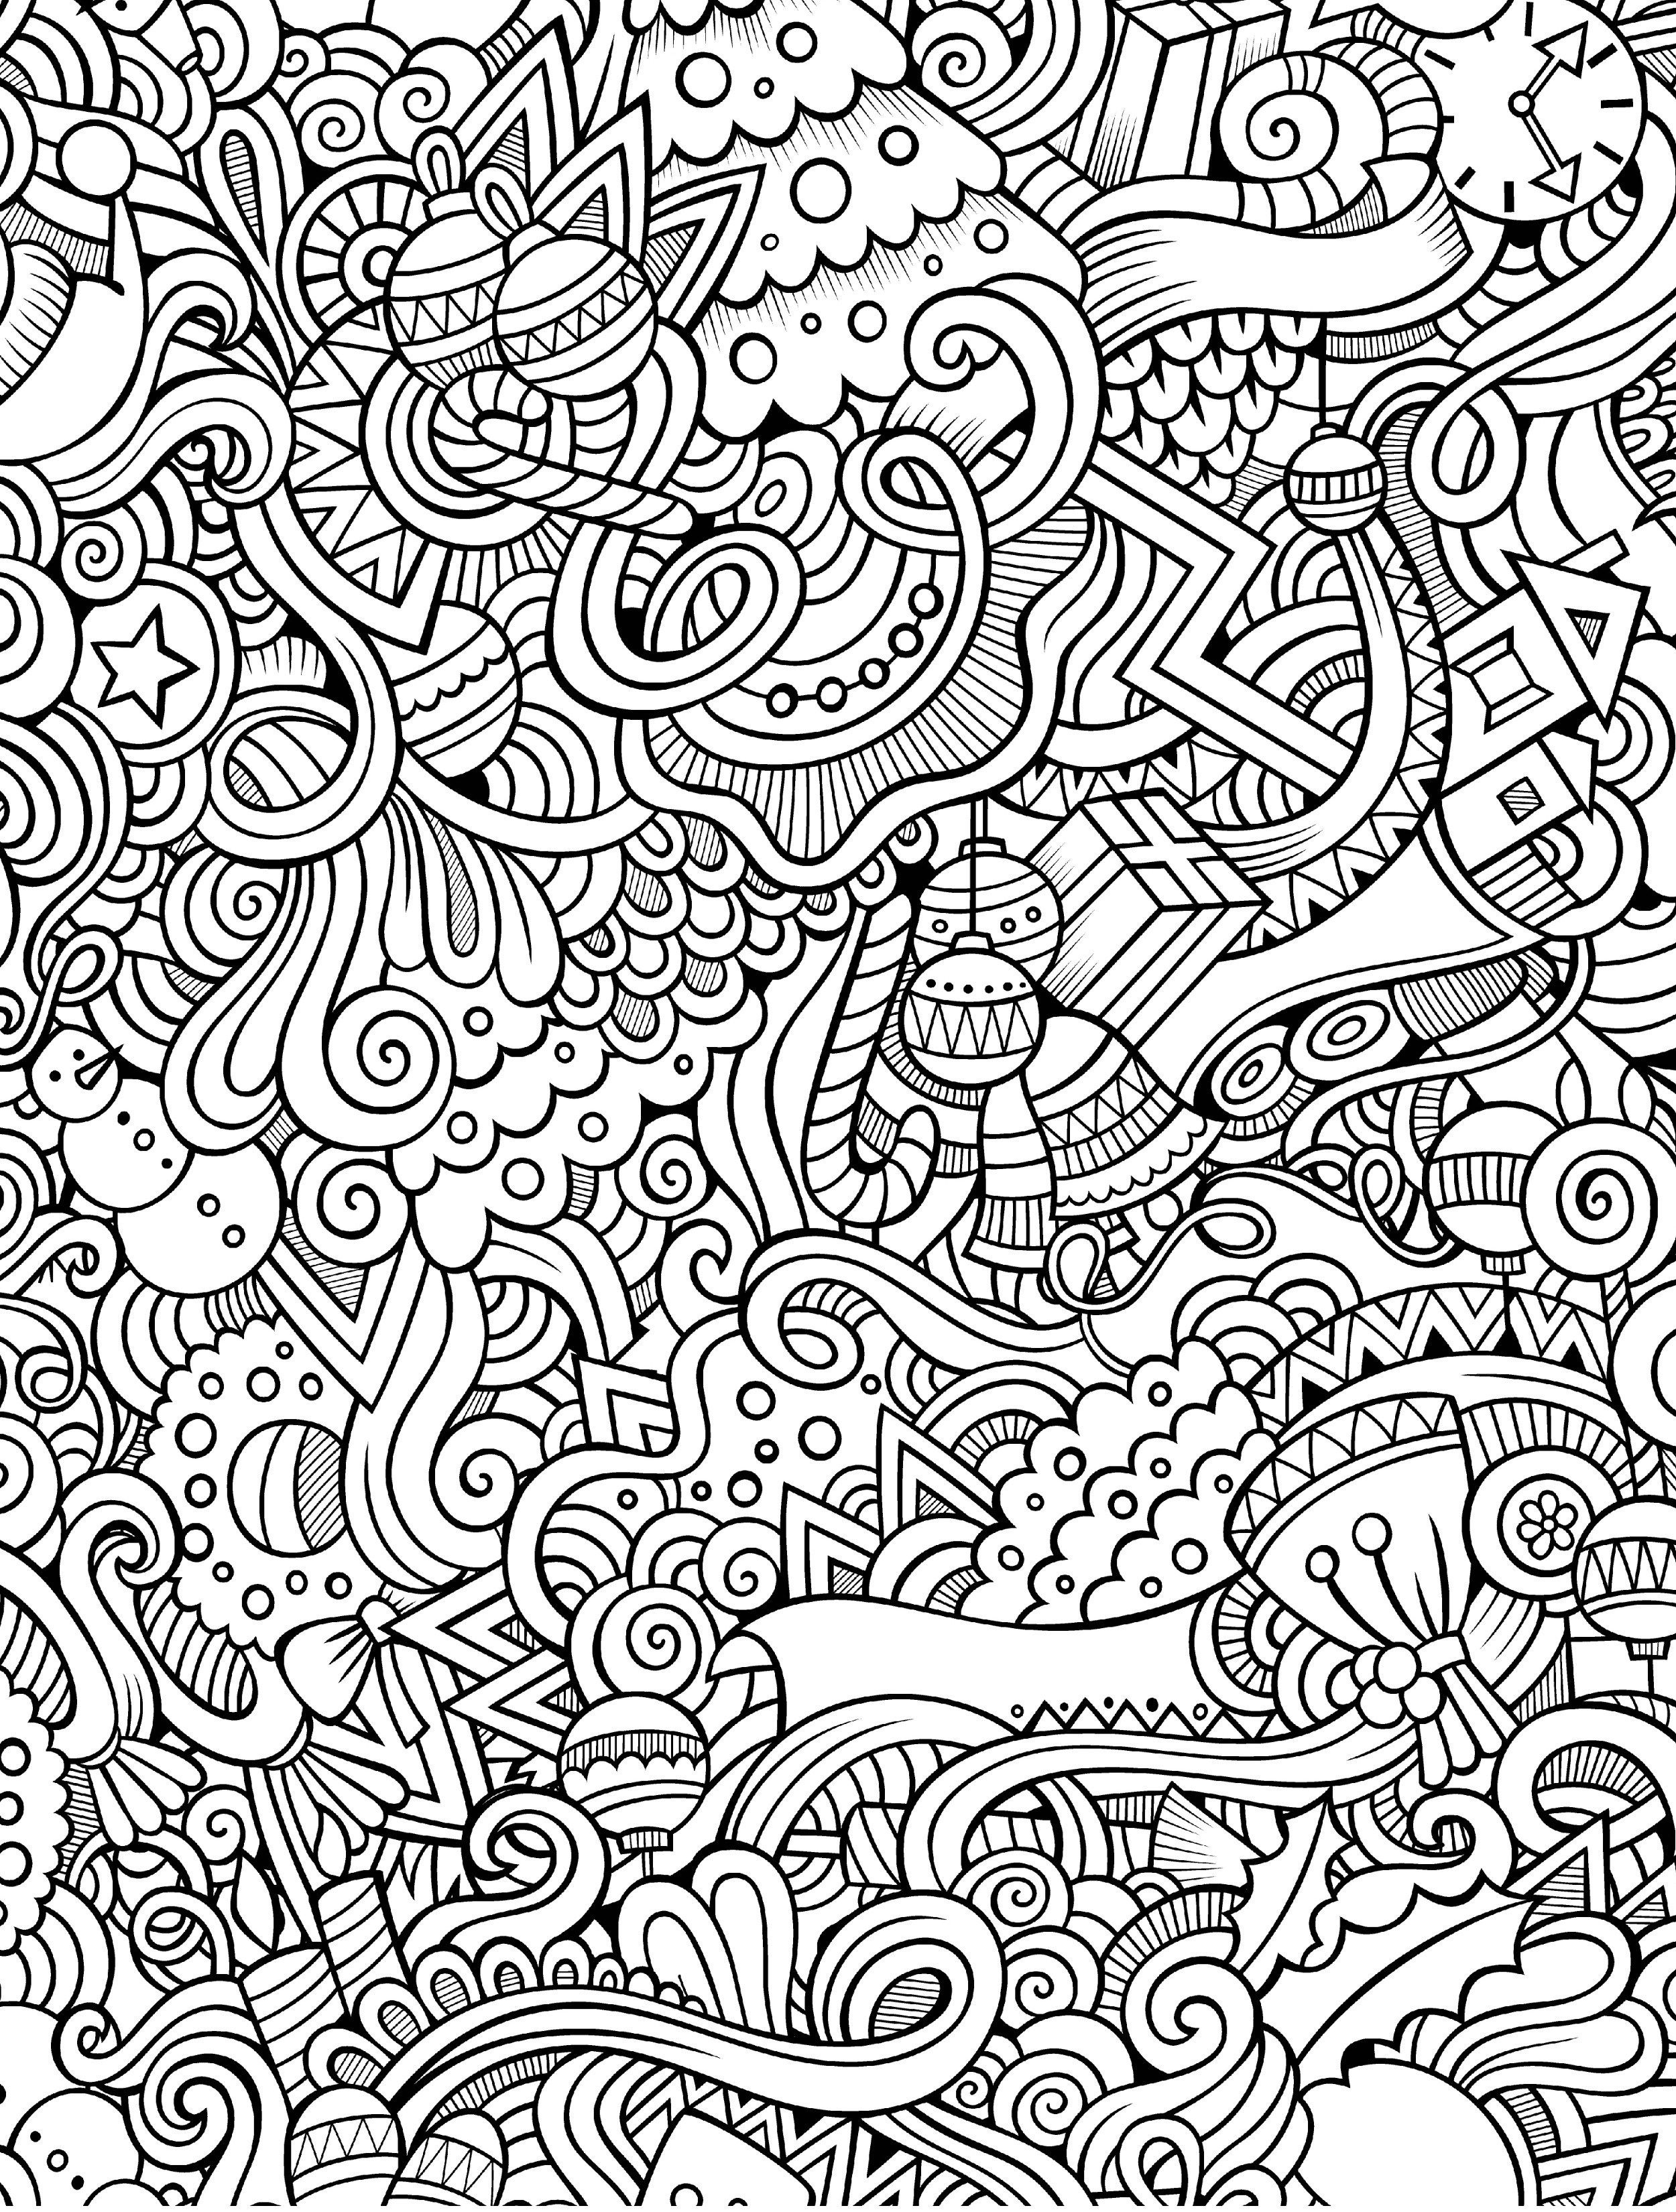 10 Free Printable Holiday Adult Coloring Pages | Coloring Pages - Free Printable Zen Coloring Pages